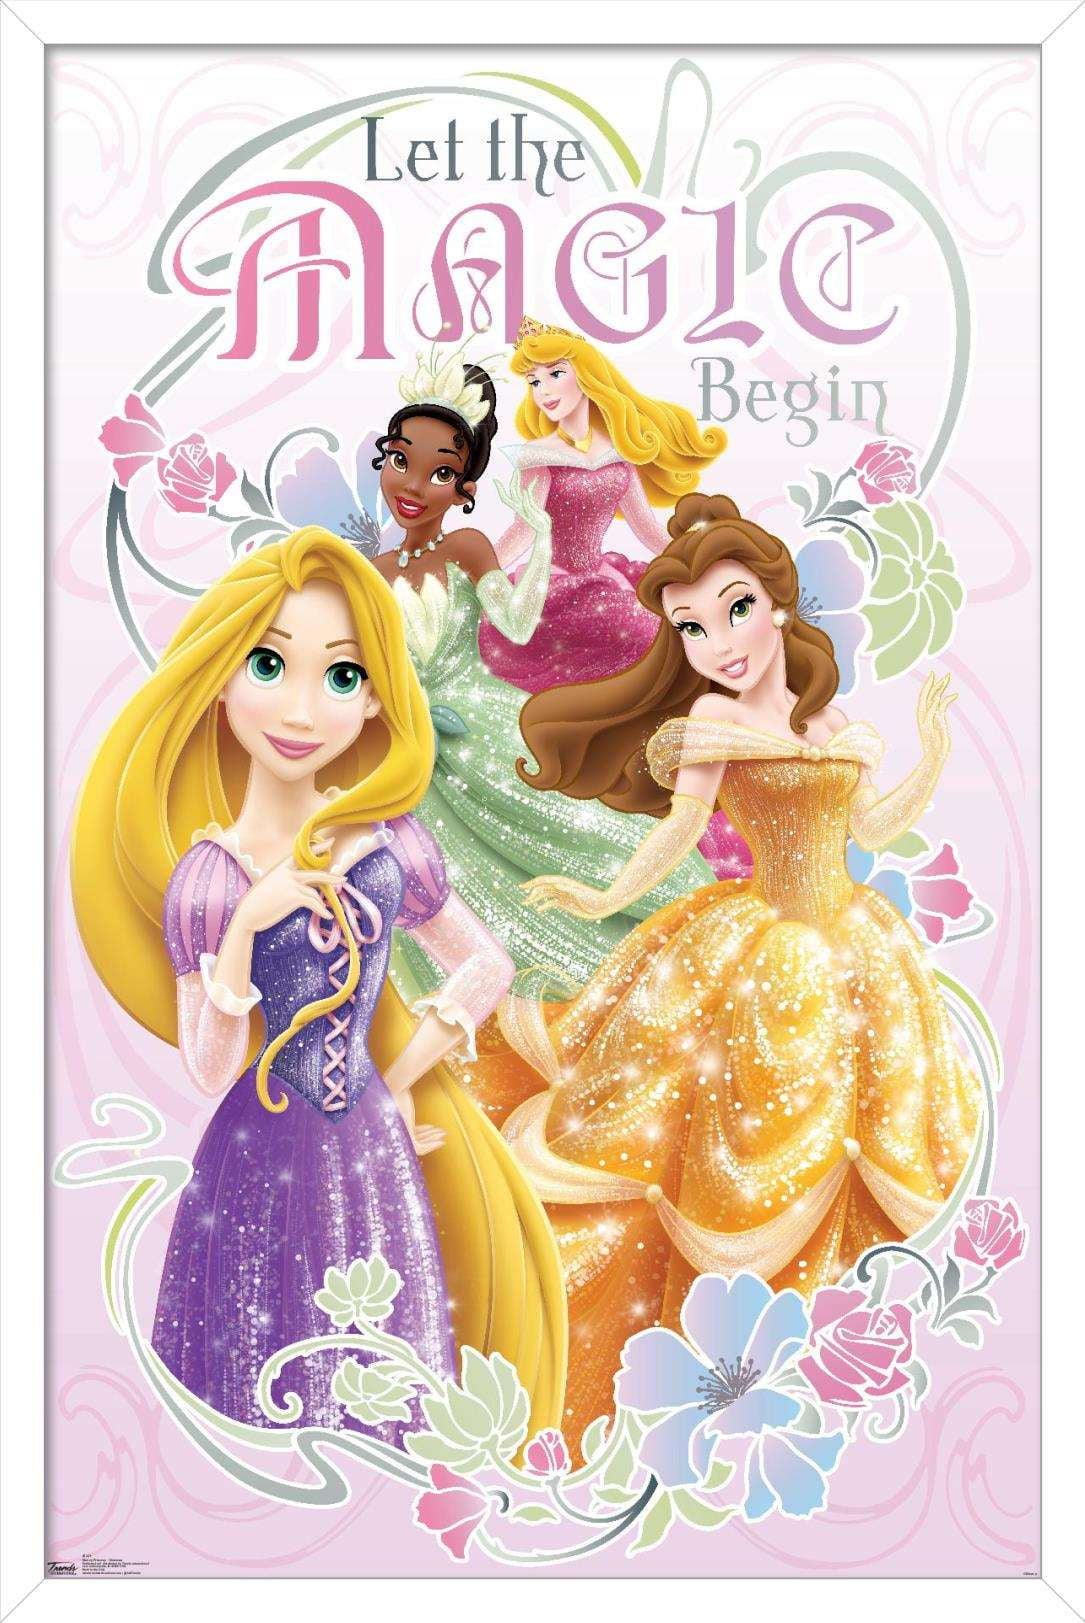 Disney Princess Learn To Write 22 Page Storybook & Magnetic Drawing Kit NEW